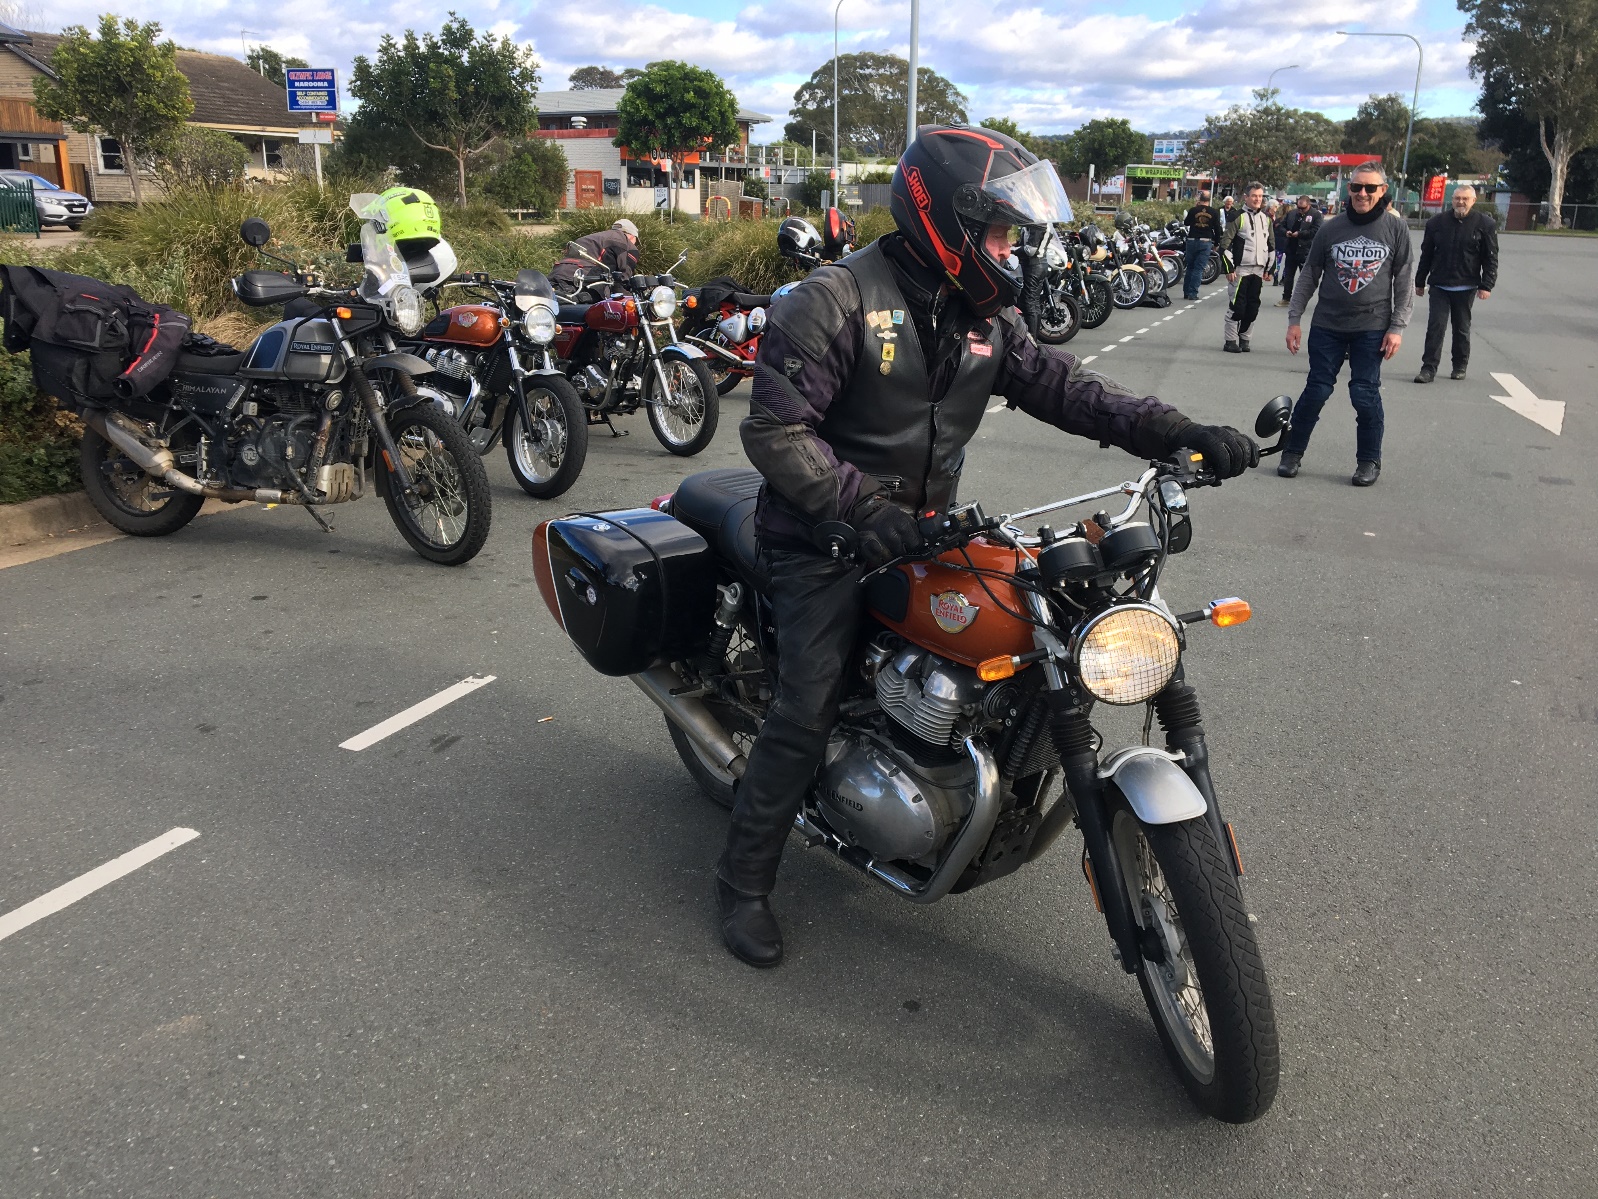 A person on a motorcycle Description automatically generated with low confidence